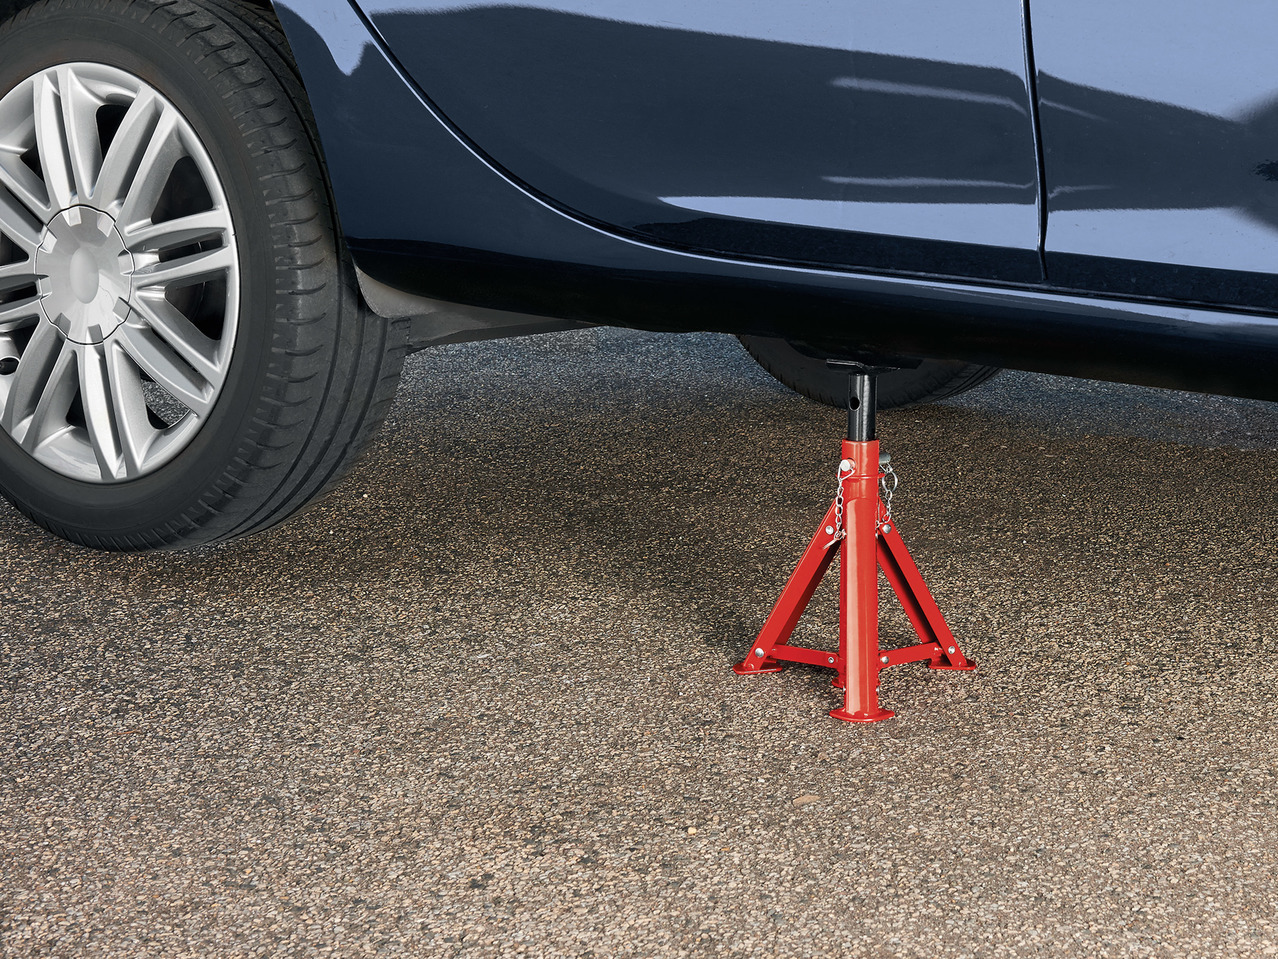 Ultimate Speed 2-Tonne Axle Stands1